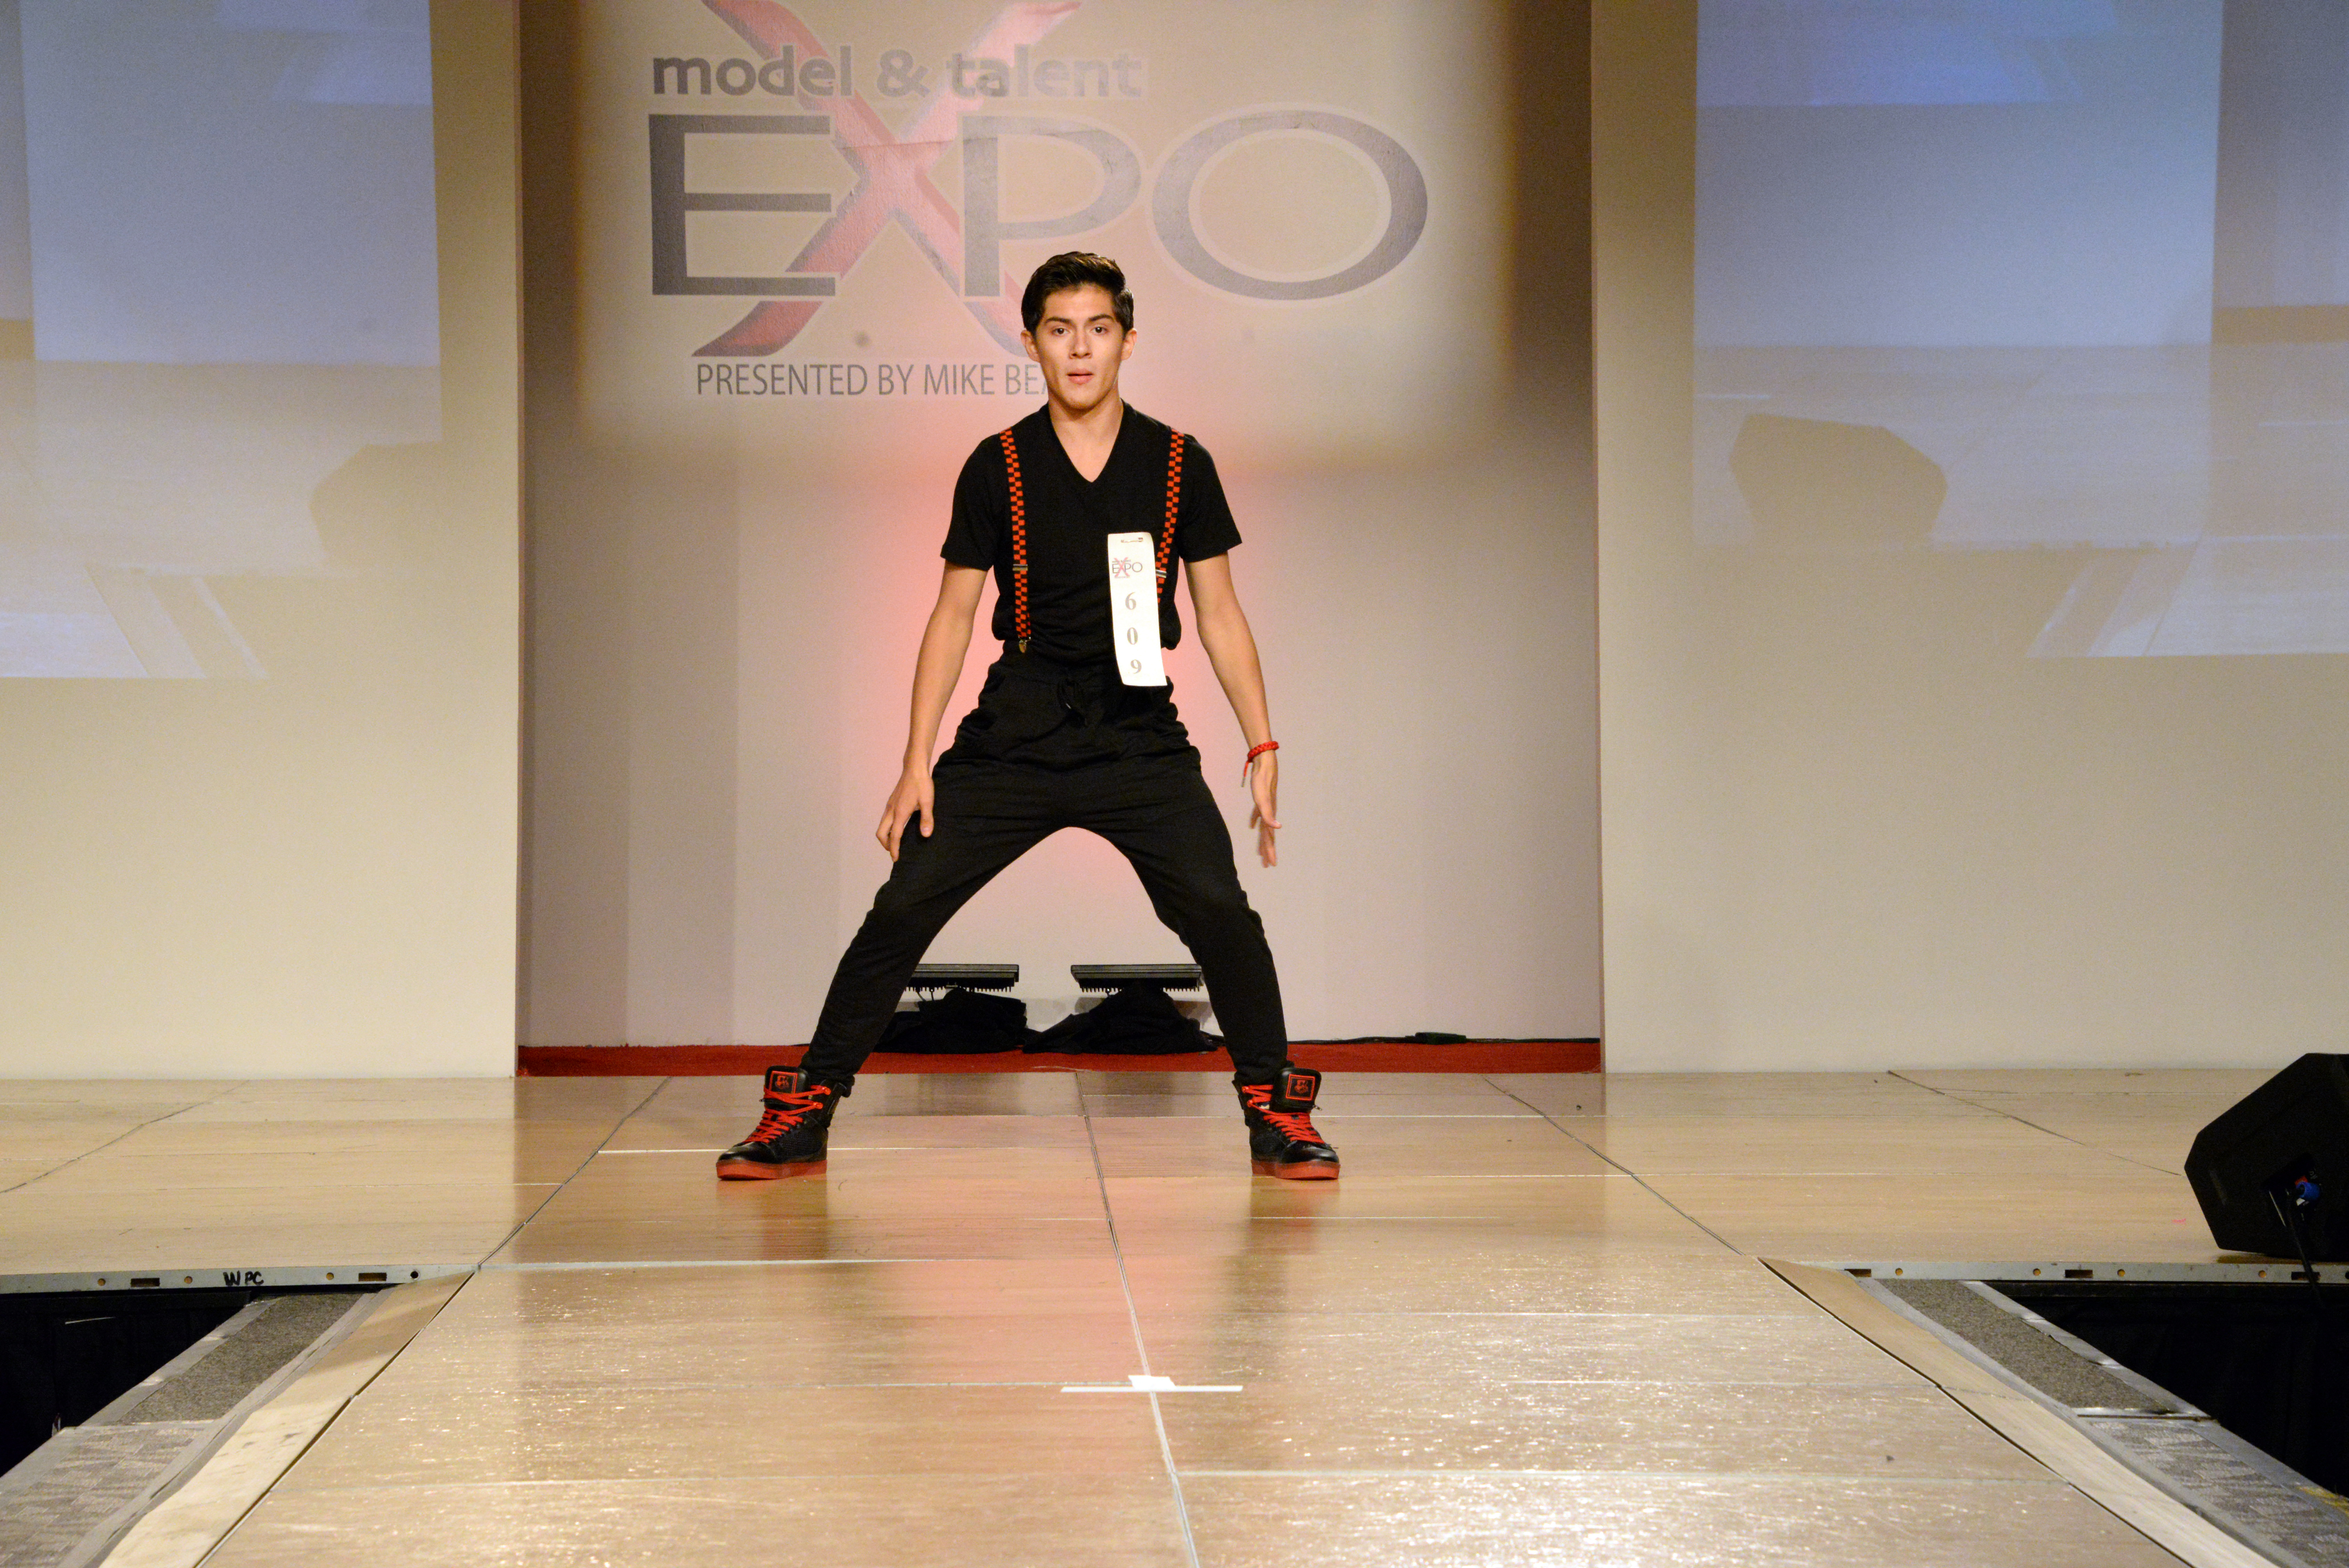 Ryder dancing at the Model and Talent Expo in Dallas TX